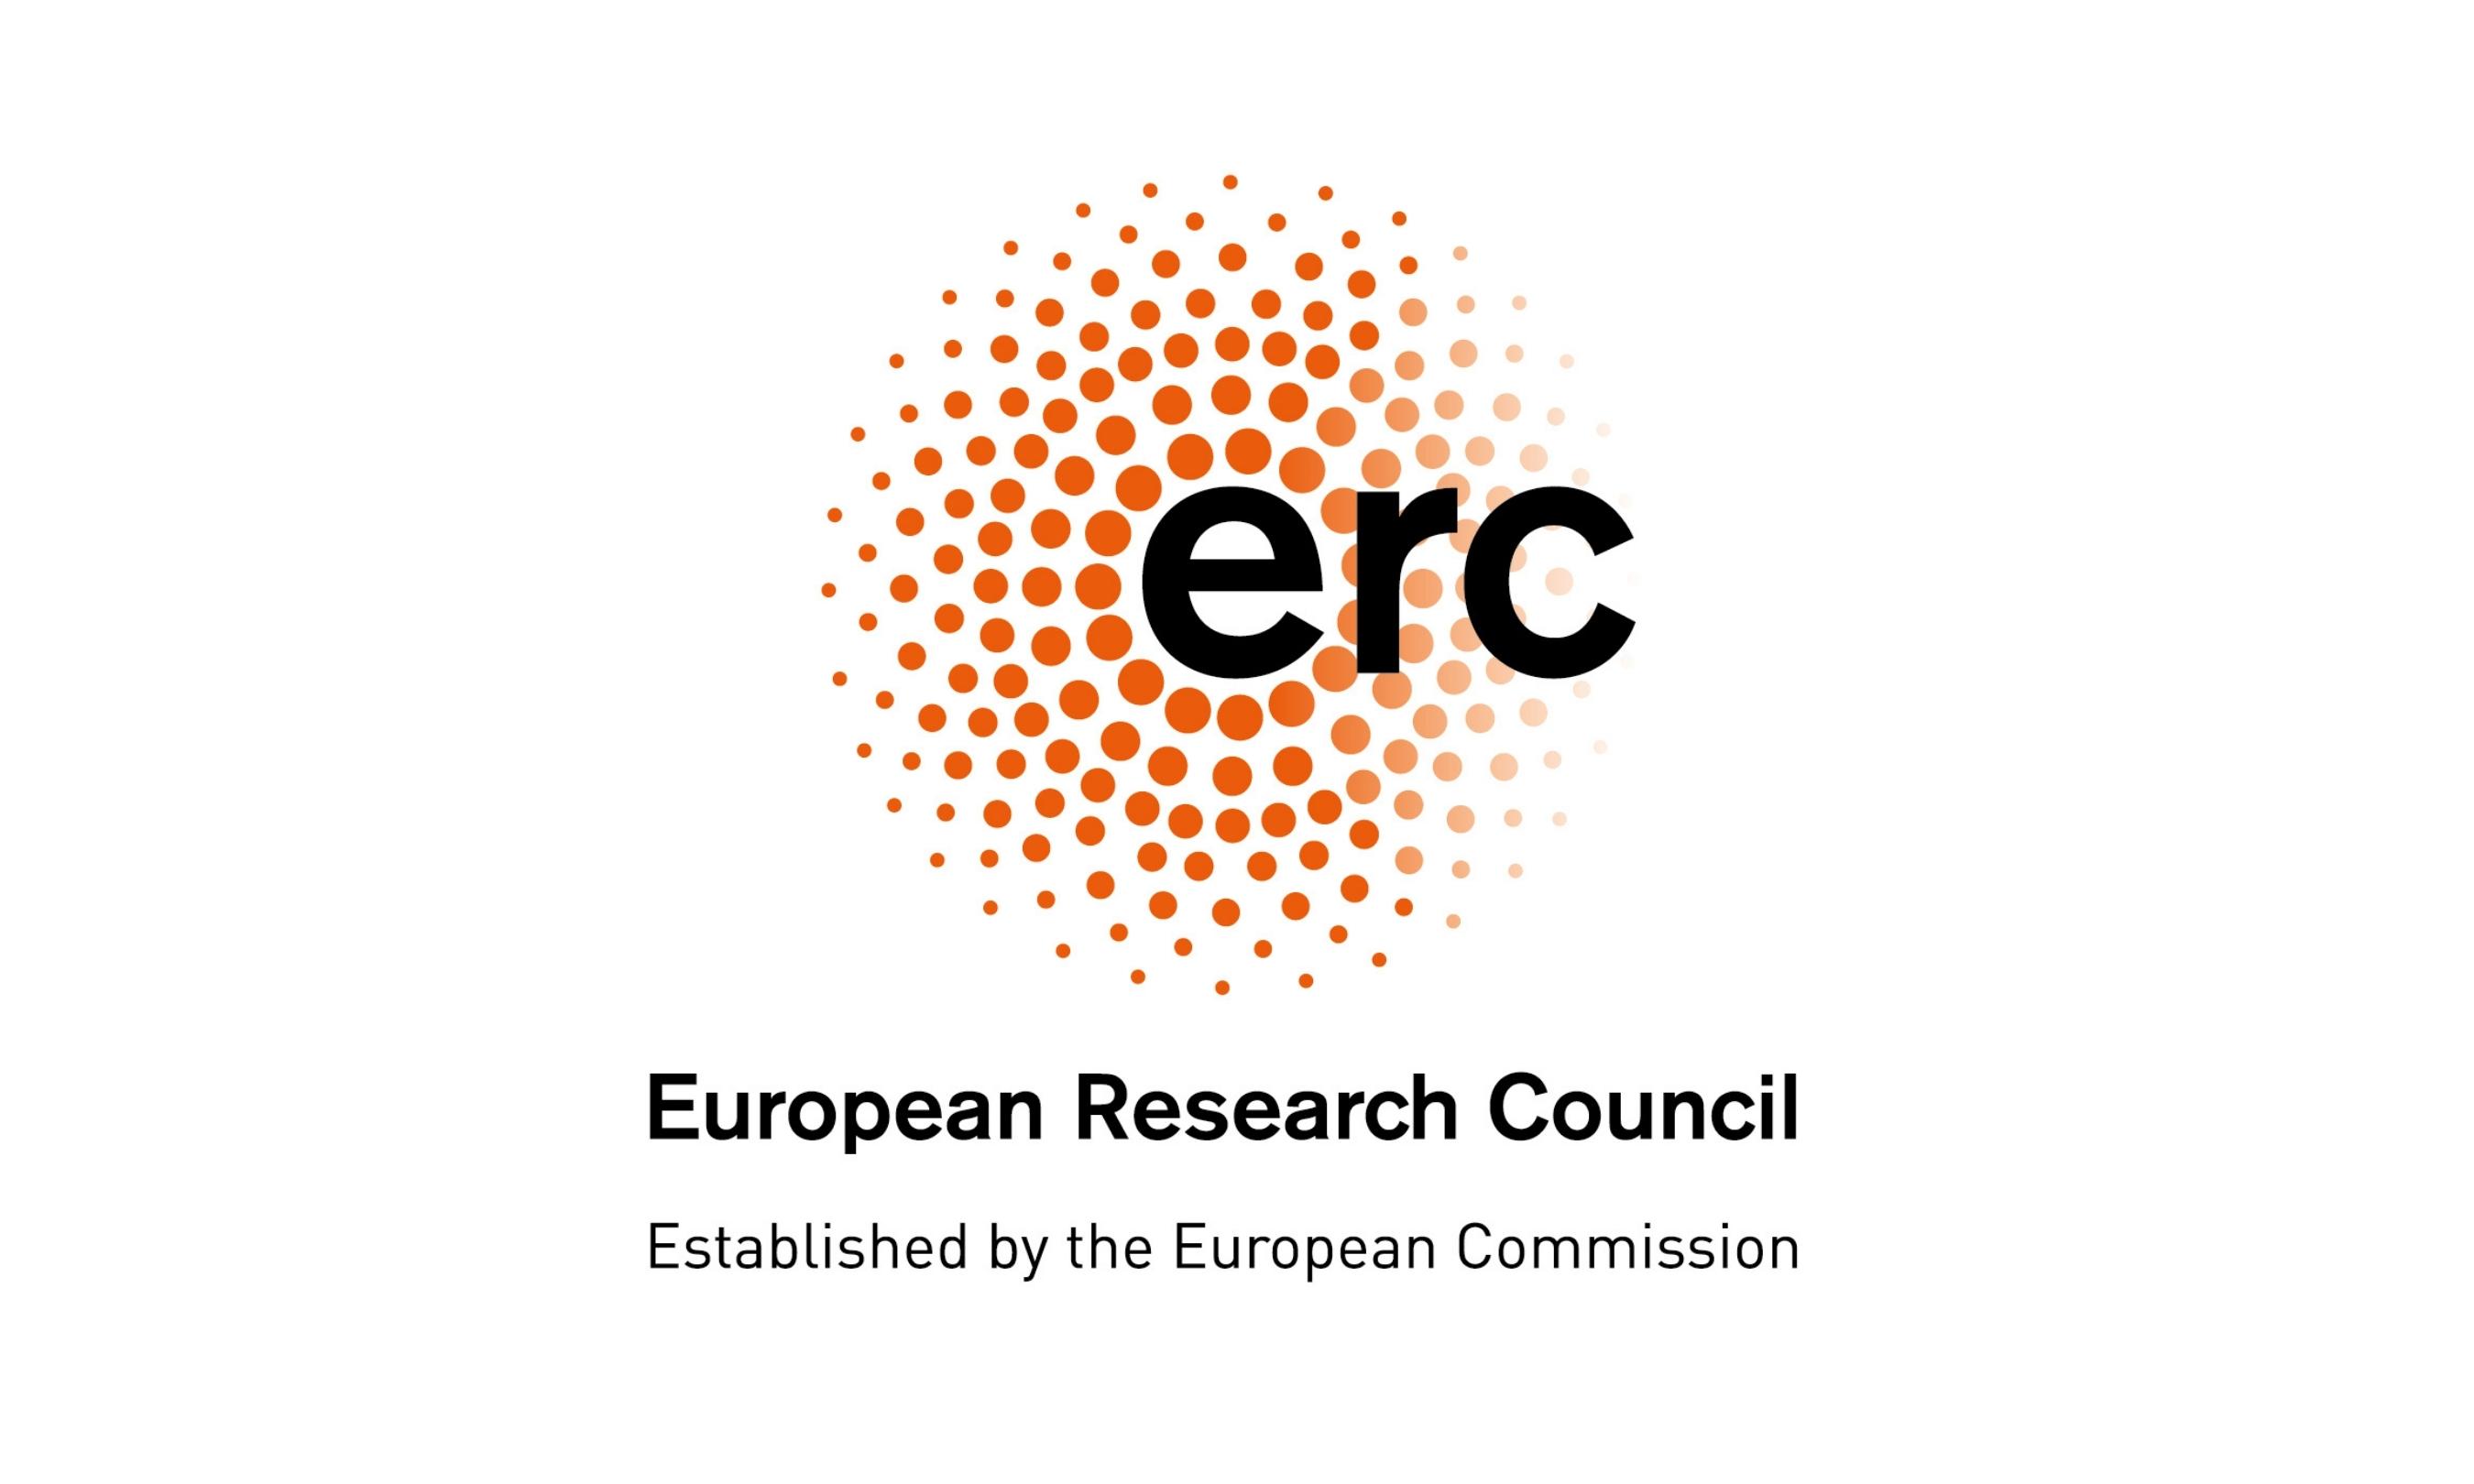 Cover image of From babies' brains to bacterial warfare: ERC invests €650 million in ground-breaking research